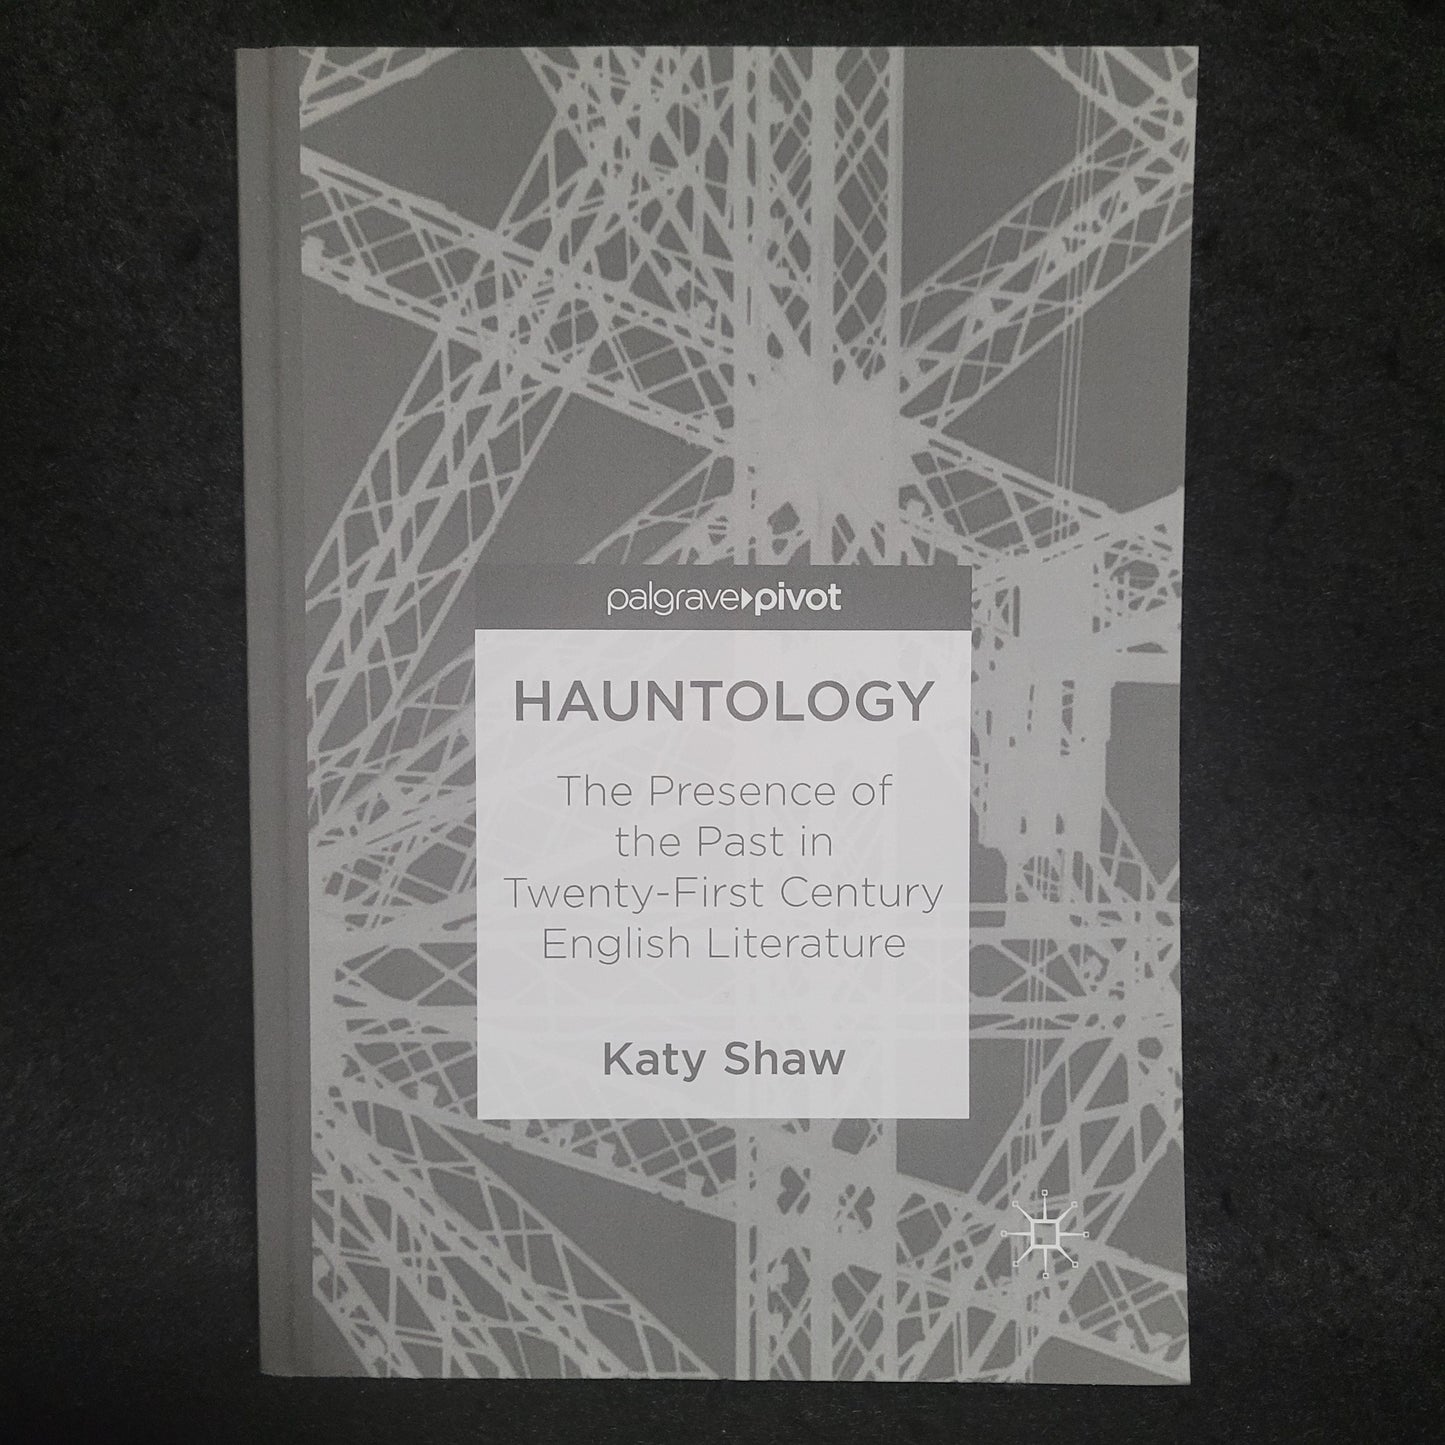 Hauntology: The Presence of the Past in Twenty-First Century English Literature by Katy Shaw (Palgrave Macmillan, 2018) Paperback